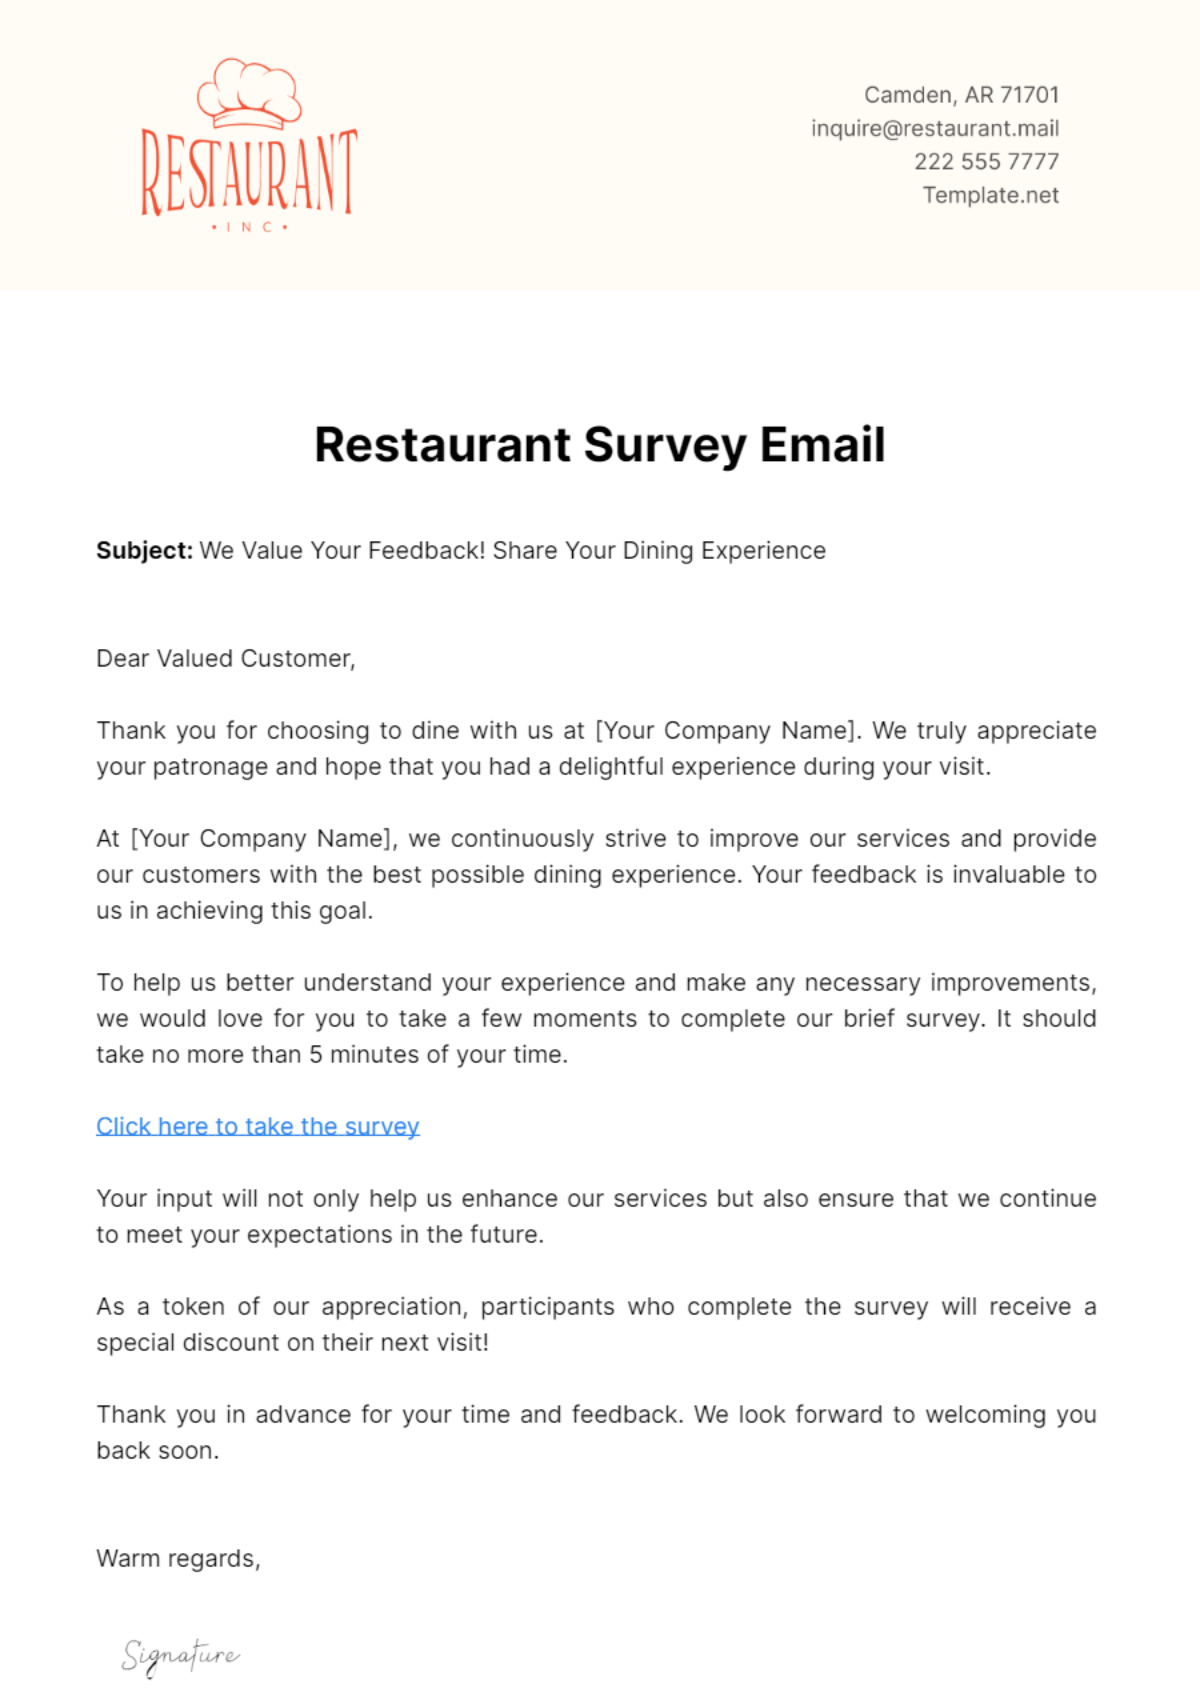 Free Restaurant Survey Email Template